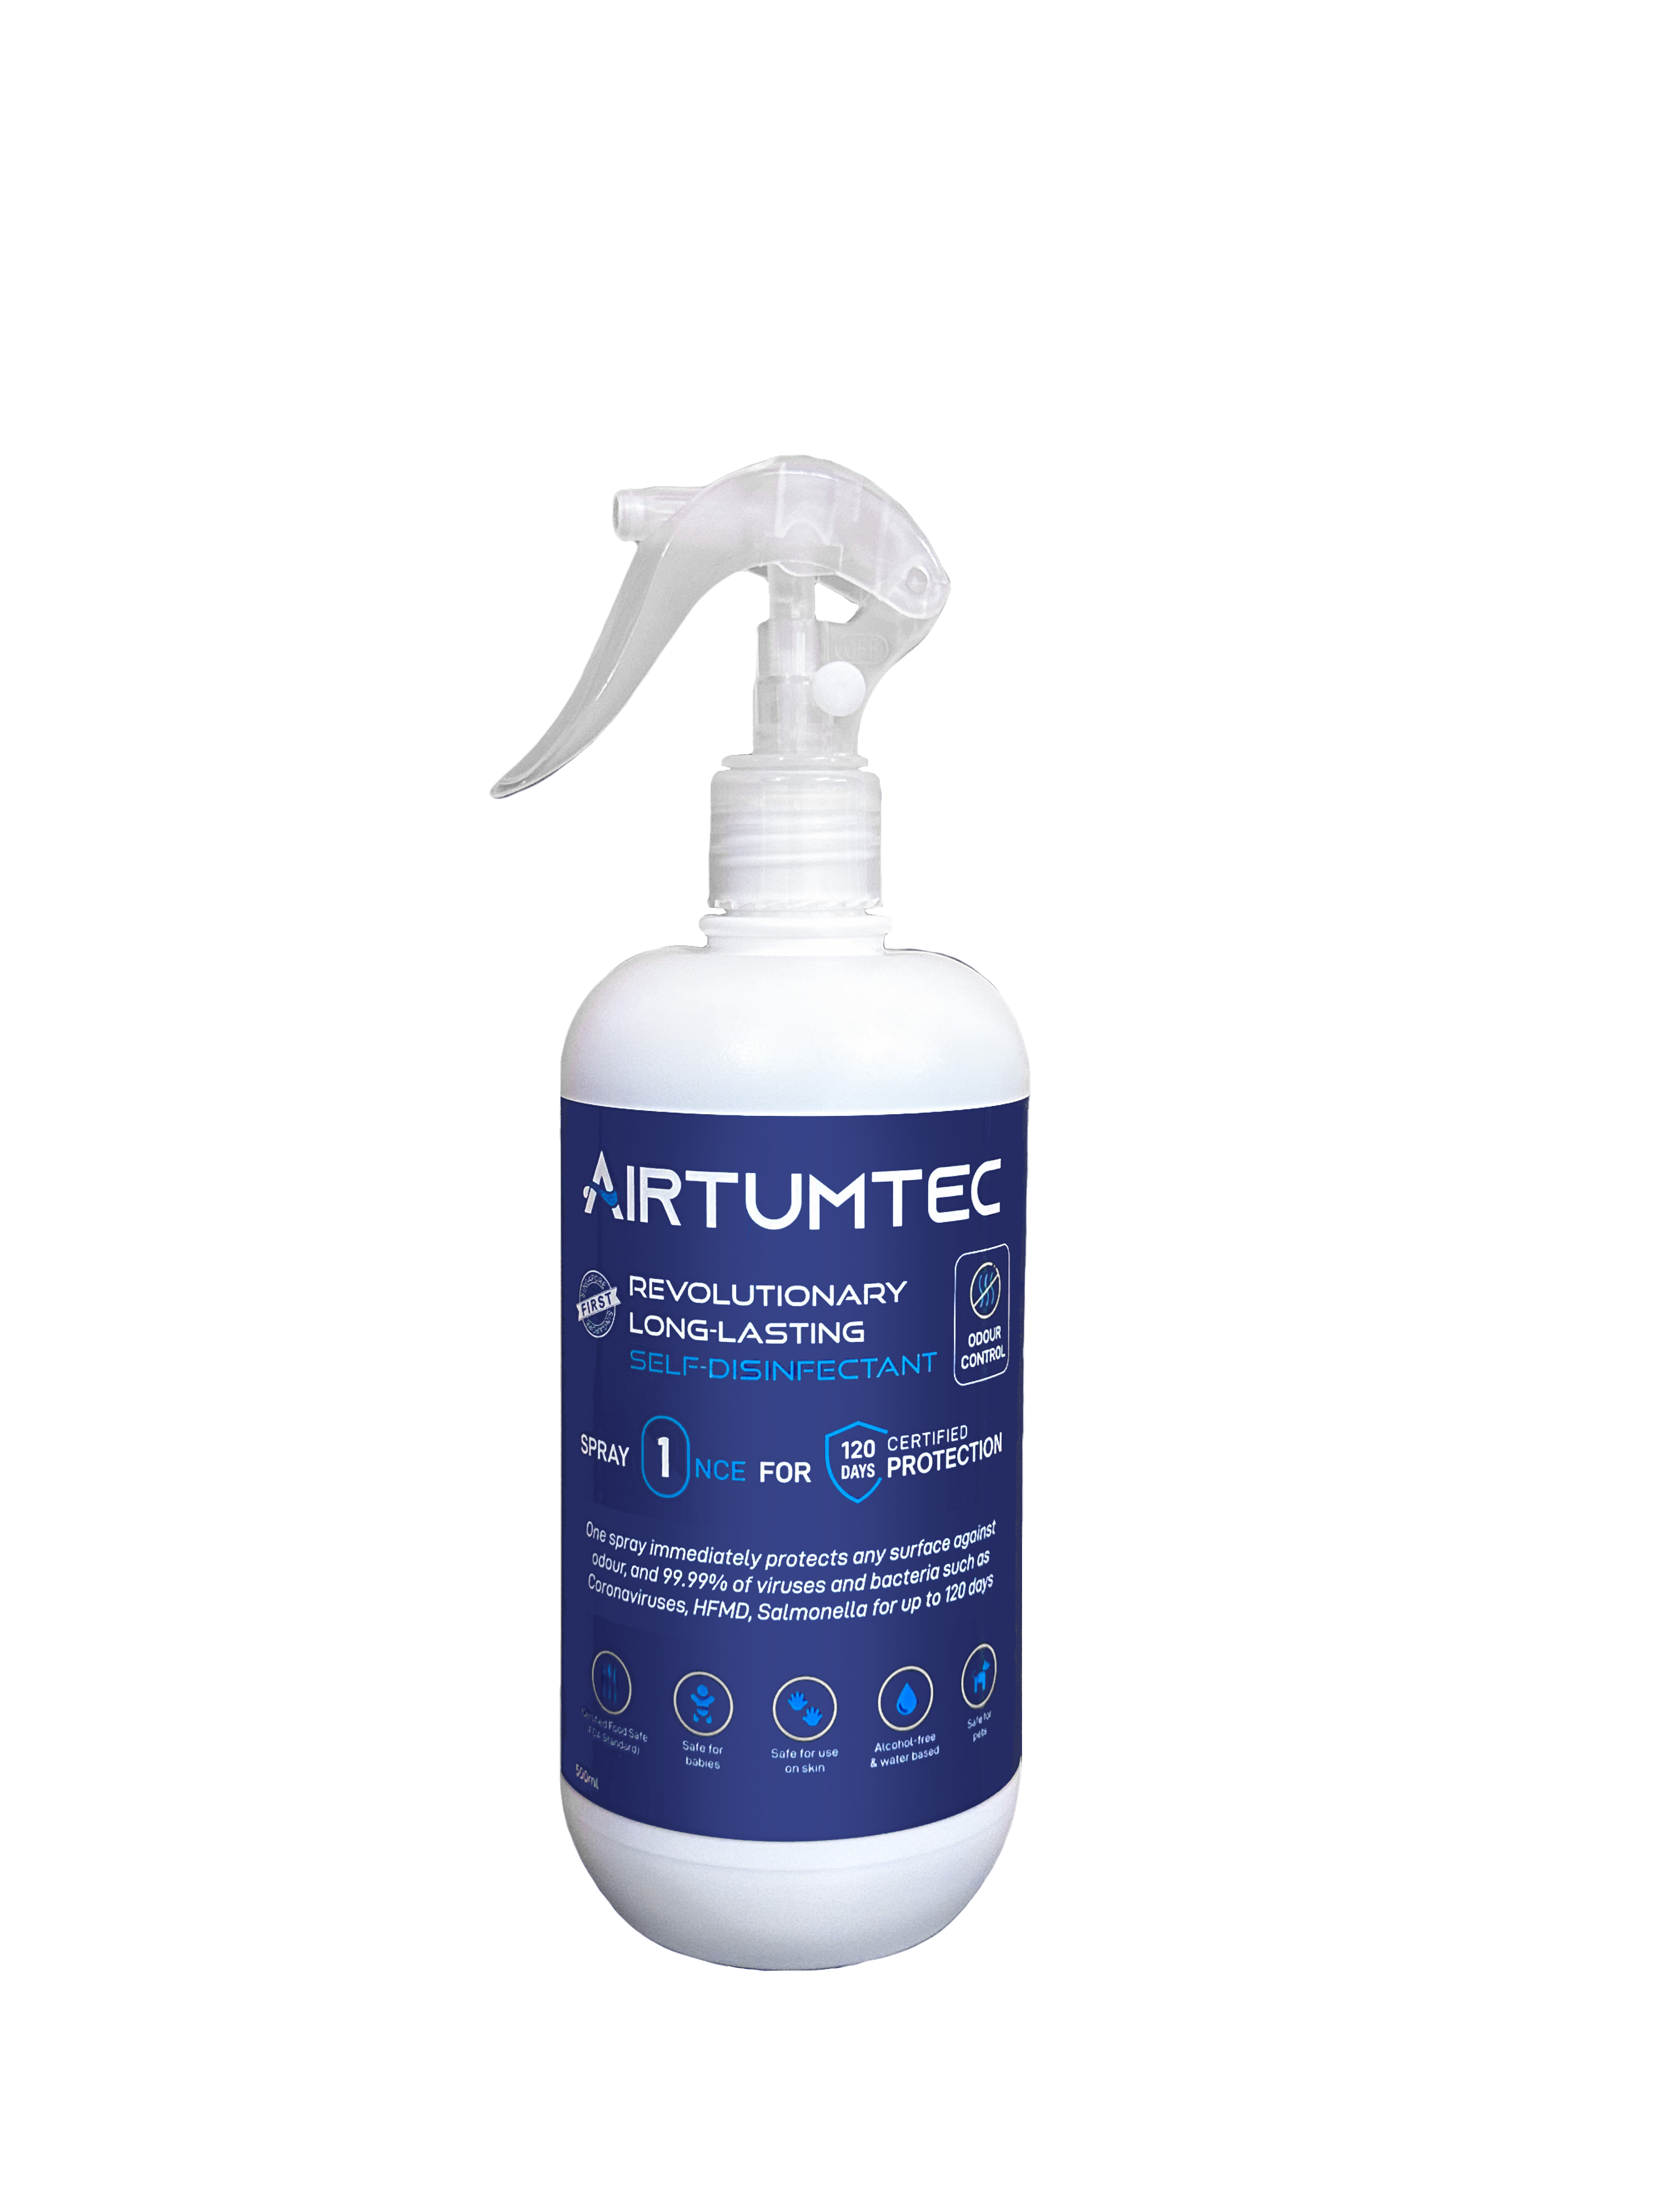 AirTumtec Self-disinfecting Antimicrobial Spray 500ml